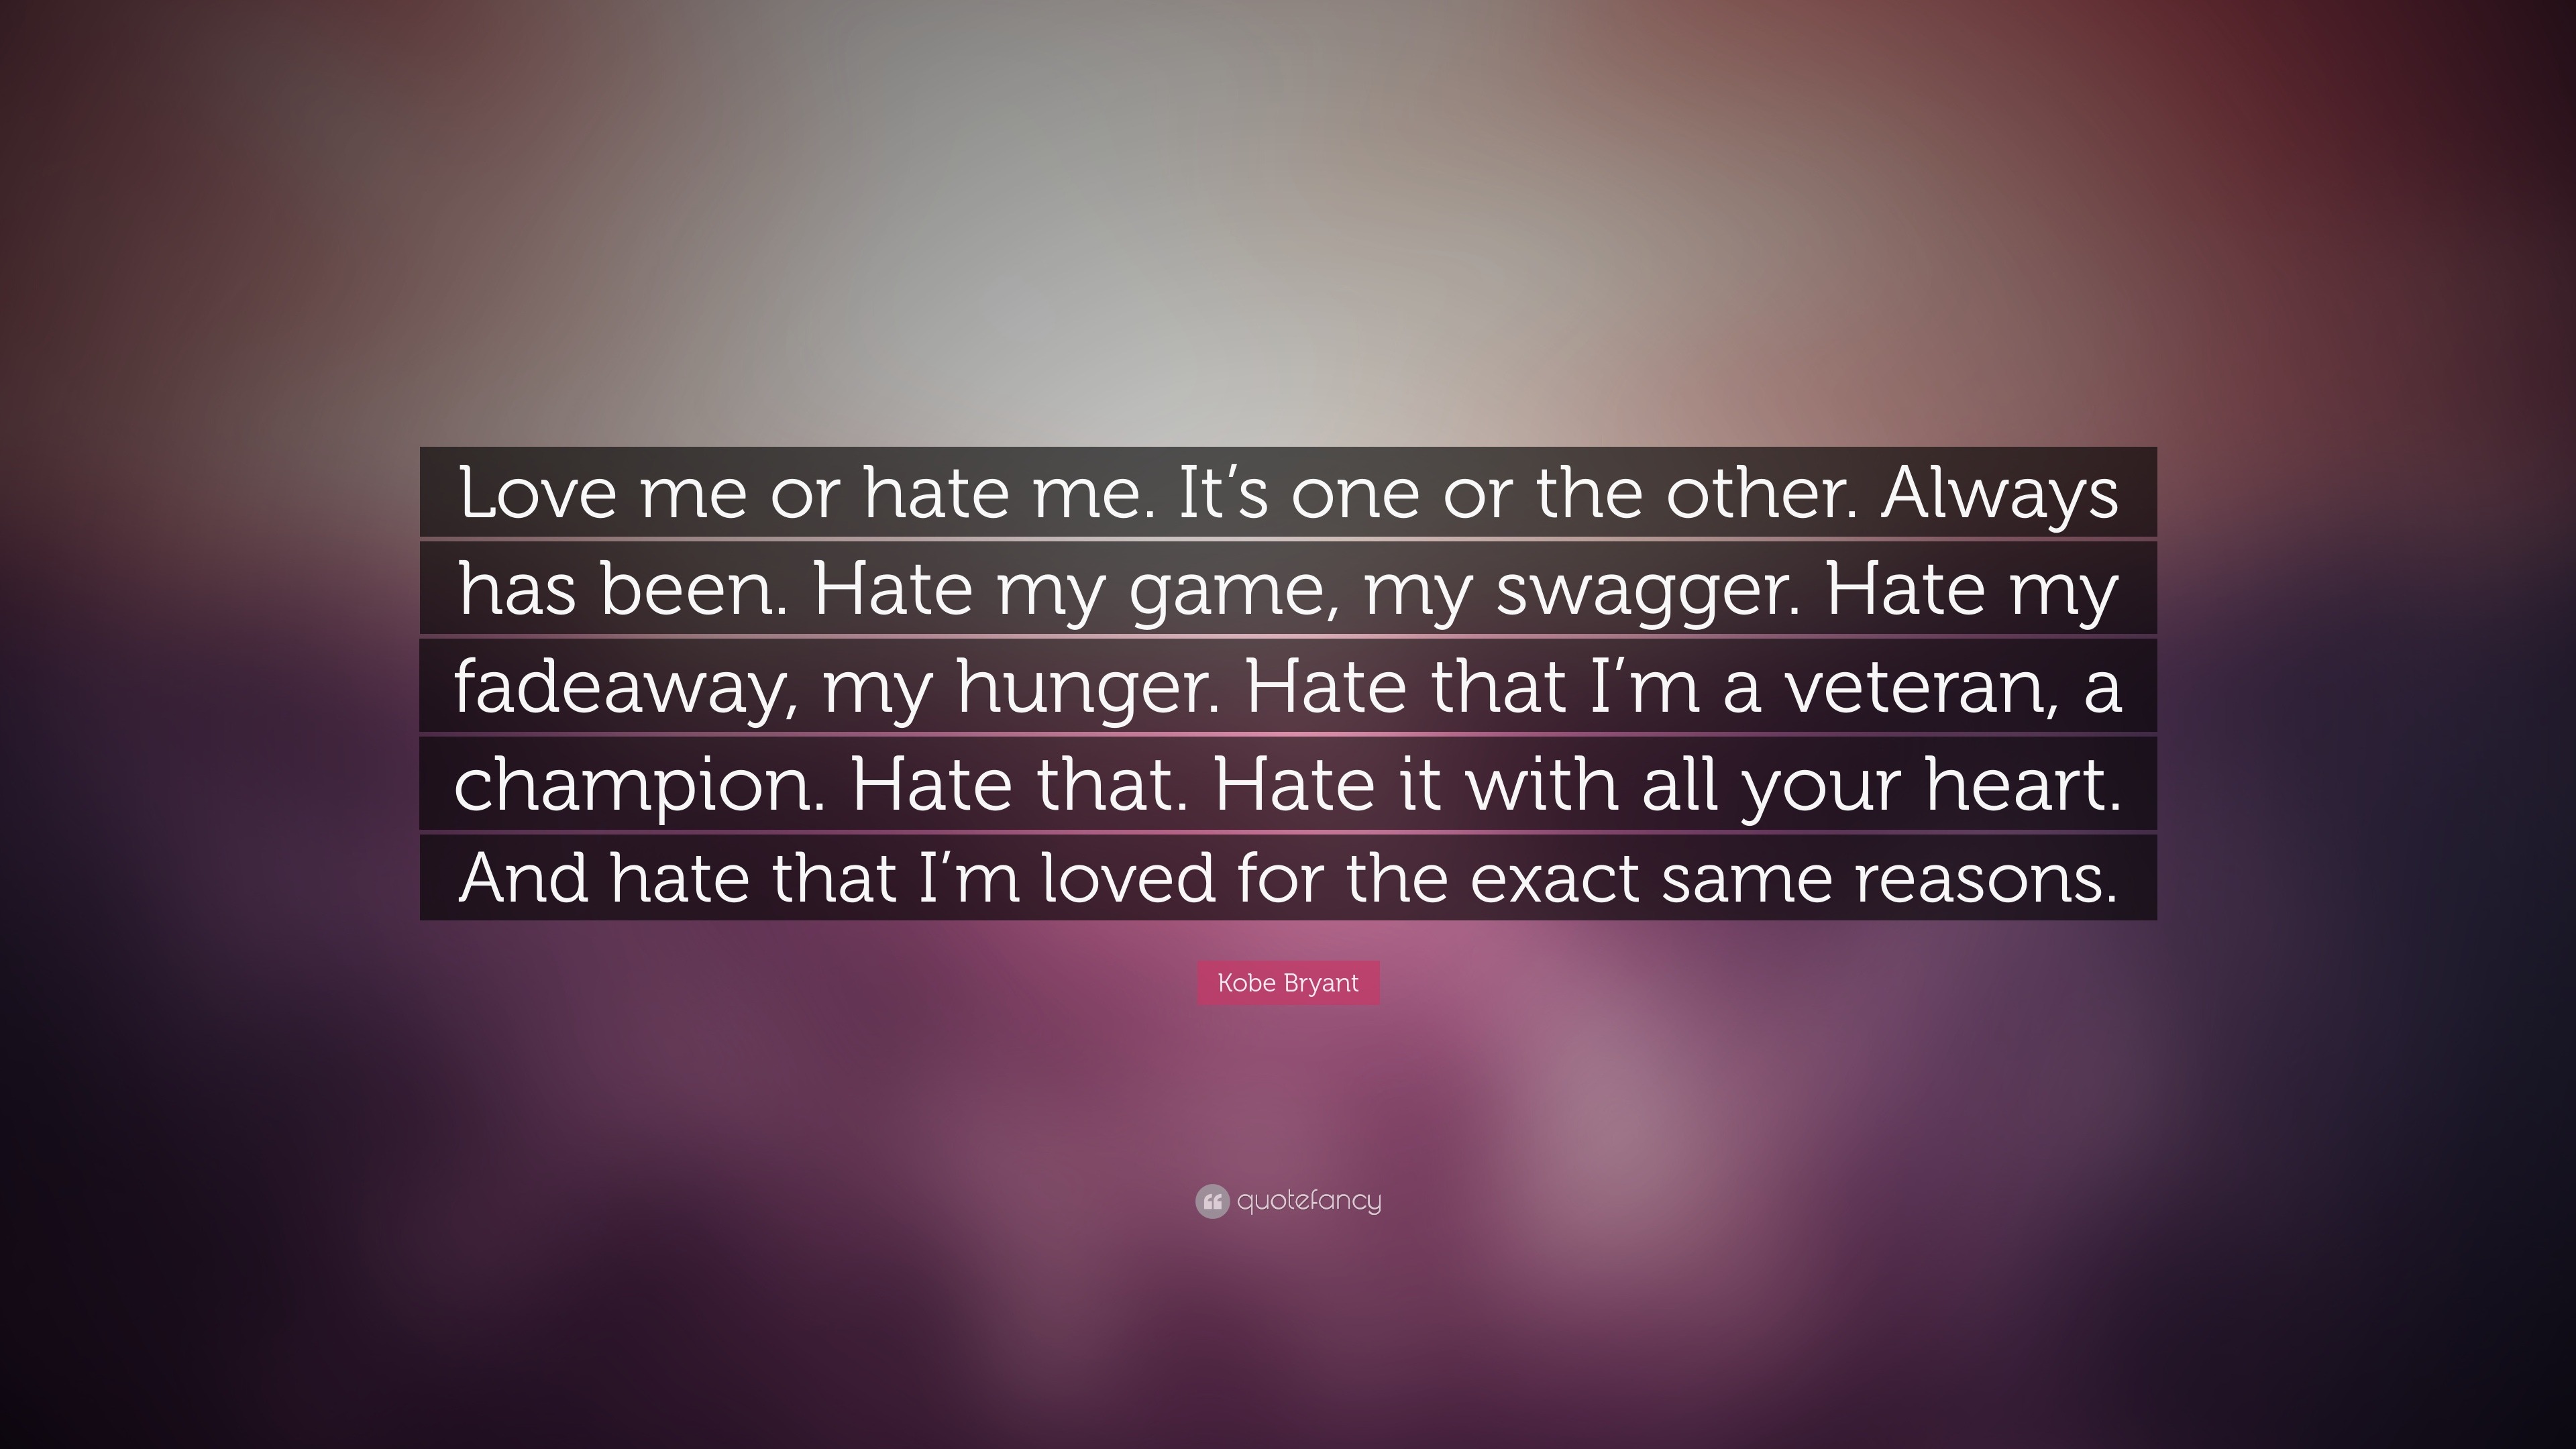 Kobe Bryant Quote “Love me or hate me It s one or the other